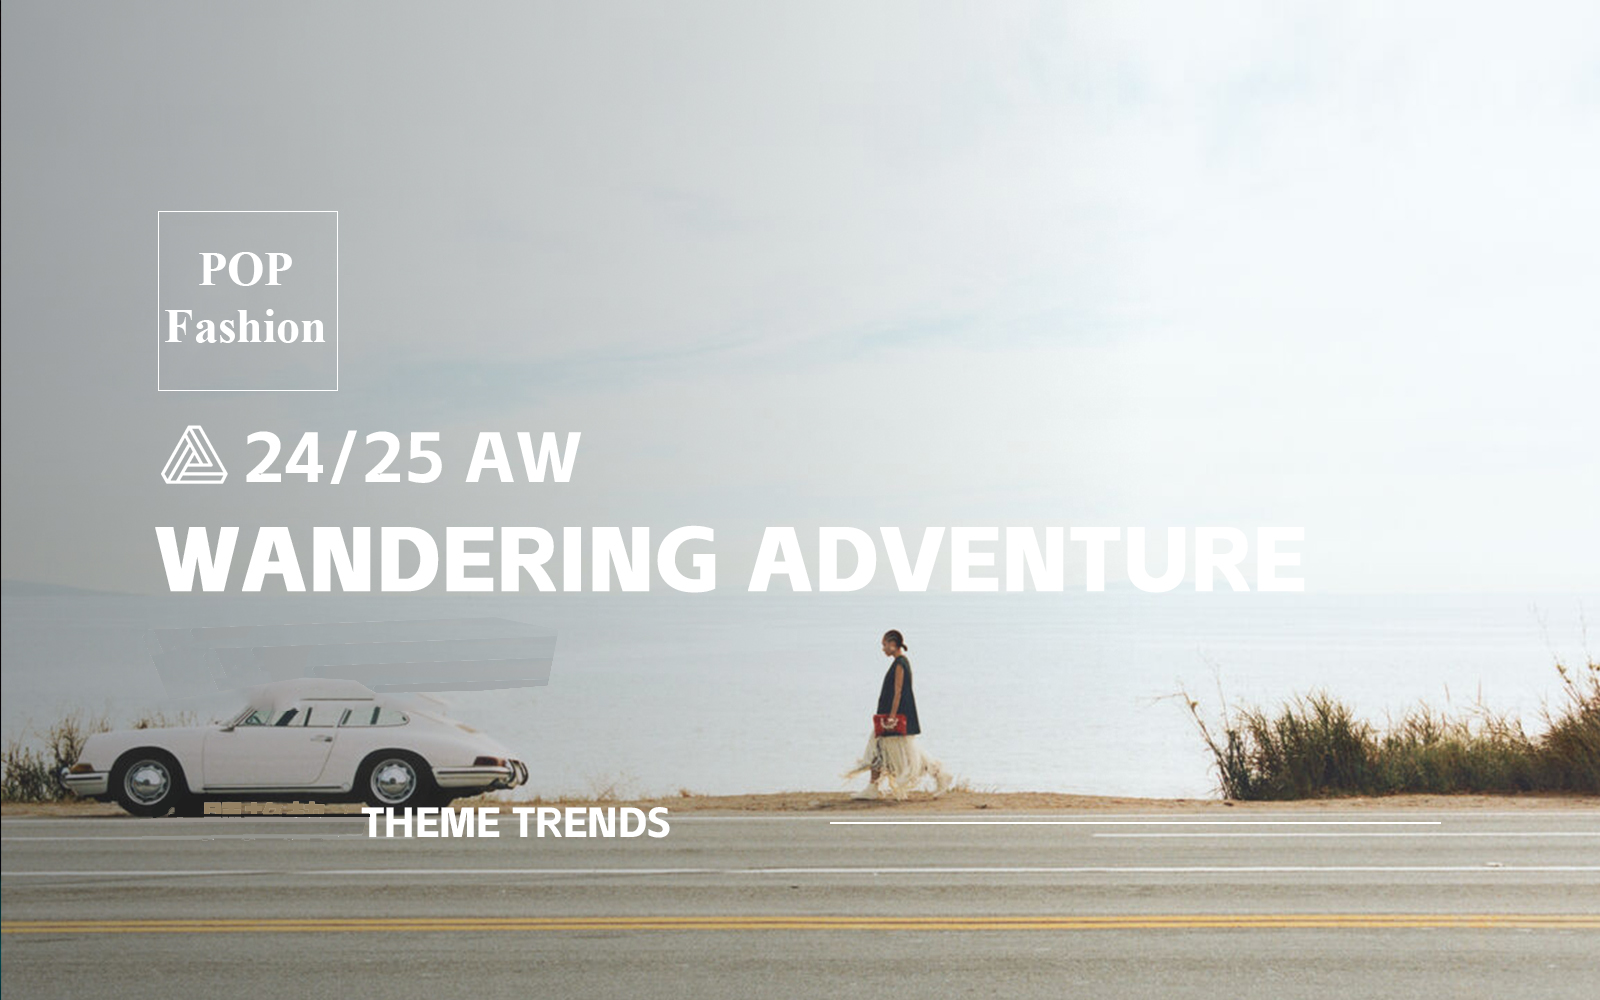 Wandering Adventure -- The A/W 24/25 Theme Trend